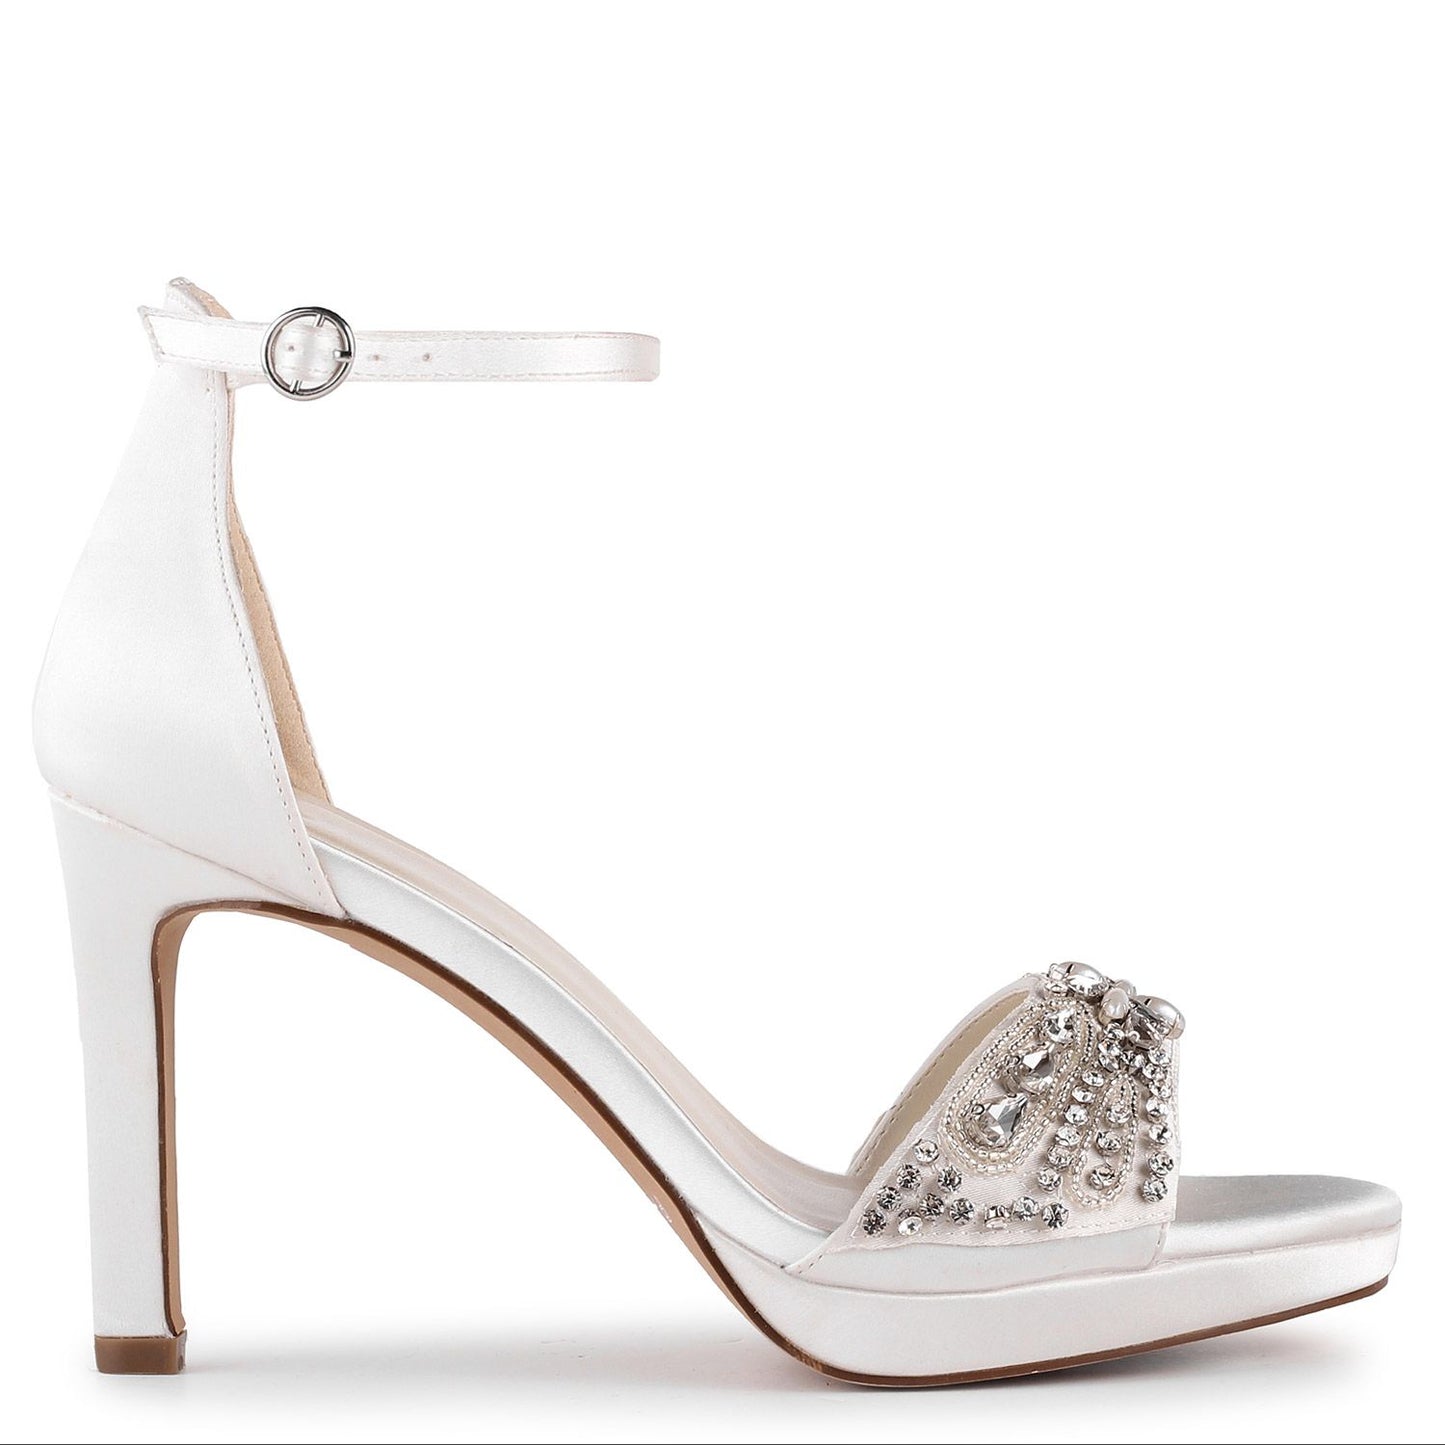 Side view of Platform sandal with 3.75 inch heel and jeweled along single strap